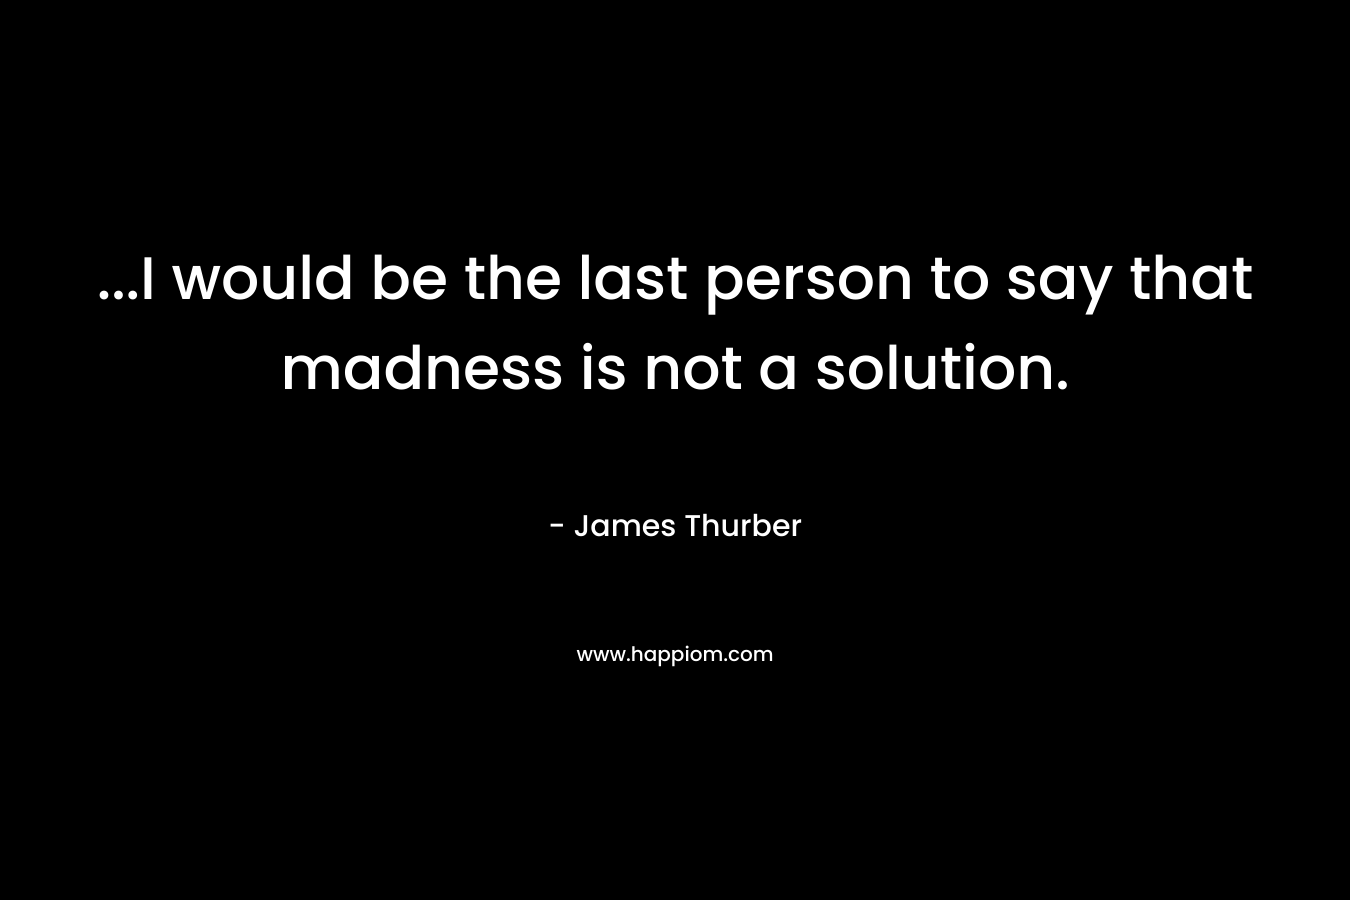 …I would be the last person to say that madness is not a solution. – James Thurber